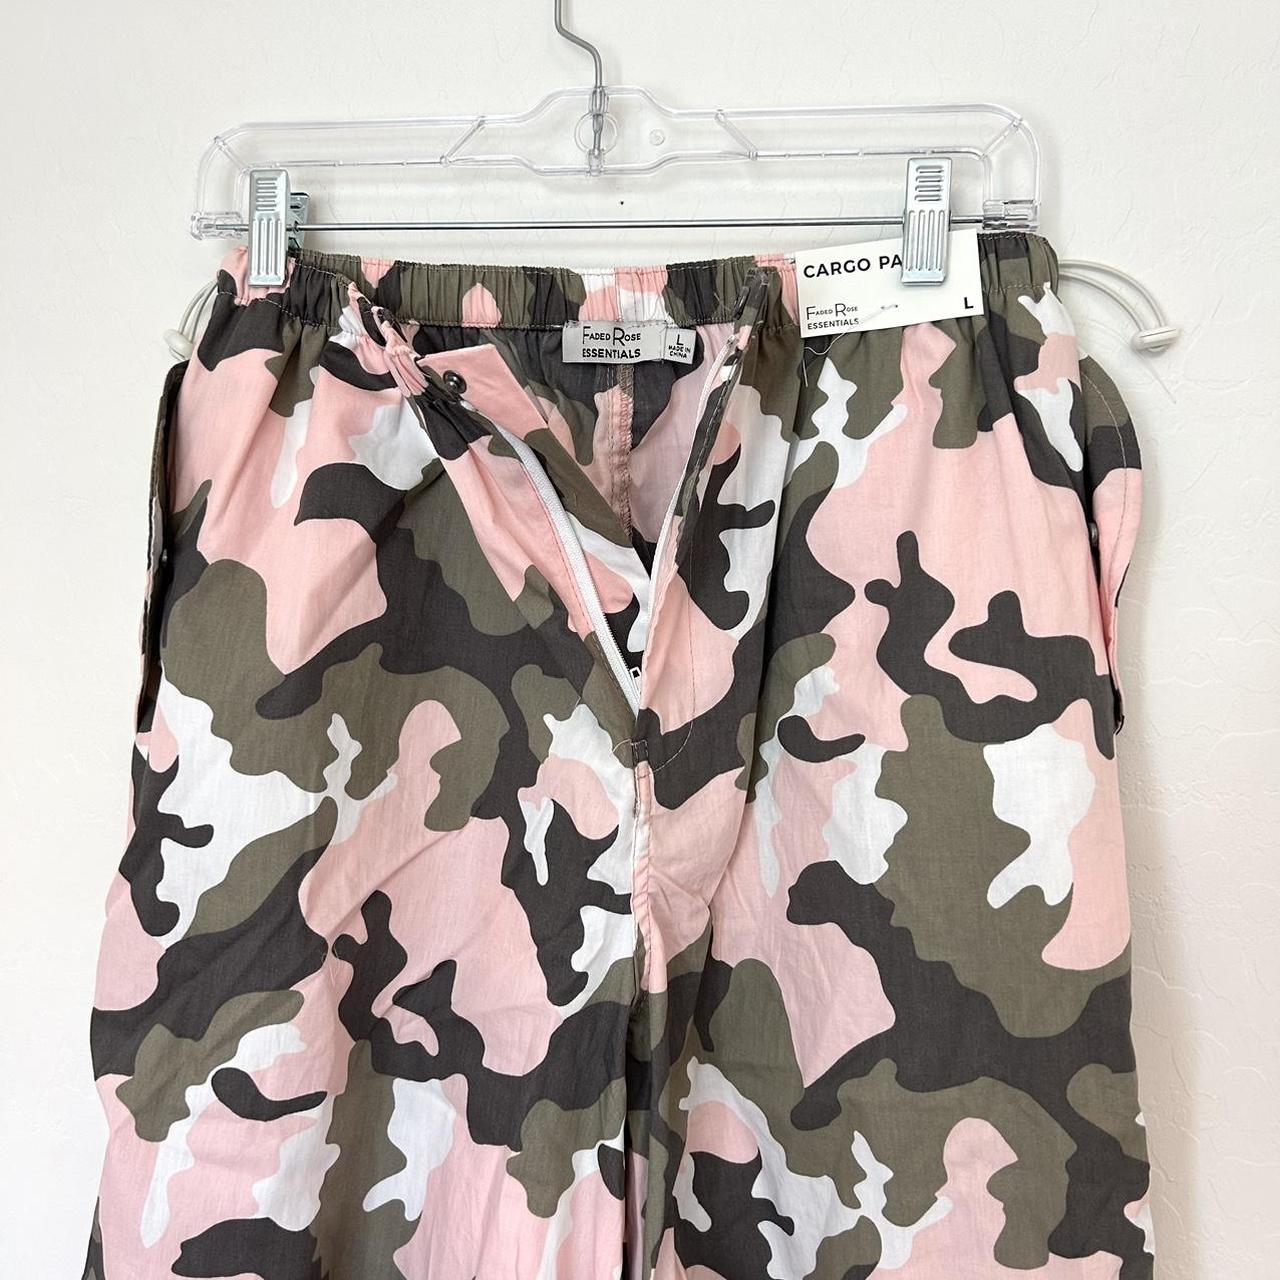 Pink Camo Parachute Pants by Faded Rose Has... - Depop